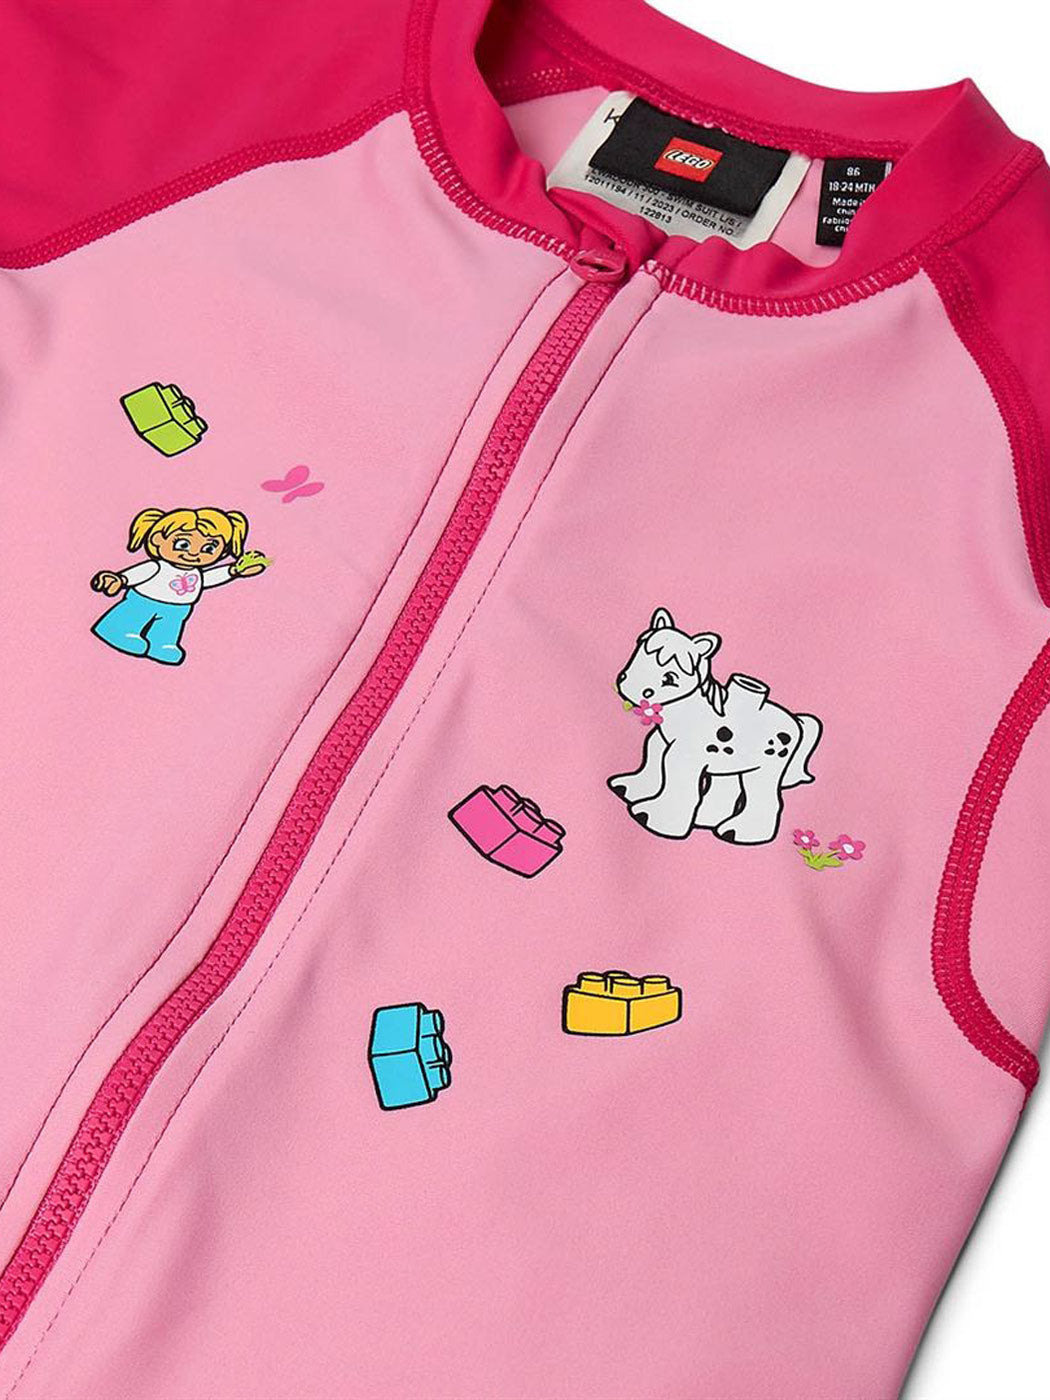 Lego wear-Coverall swimsuit for girl-12011194 pink